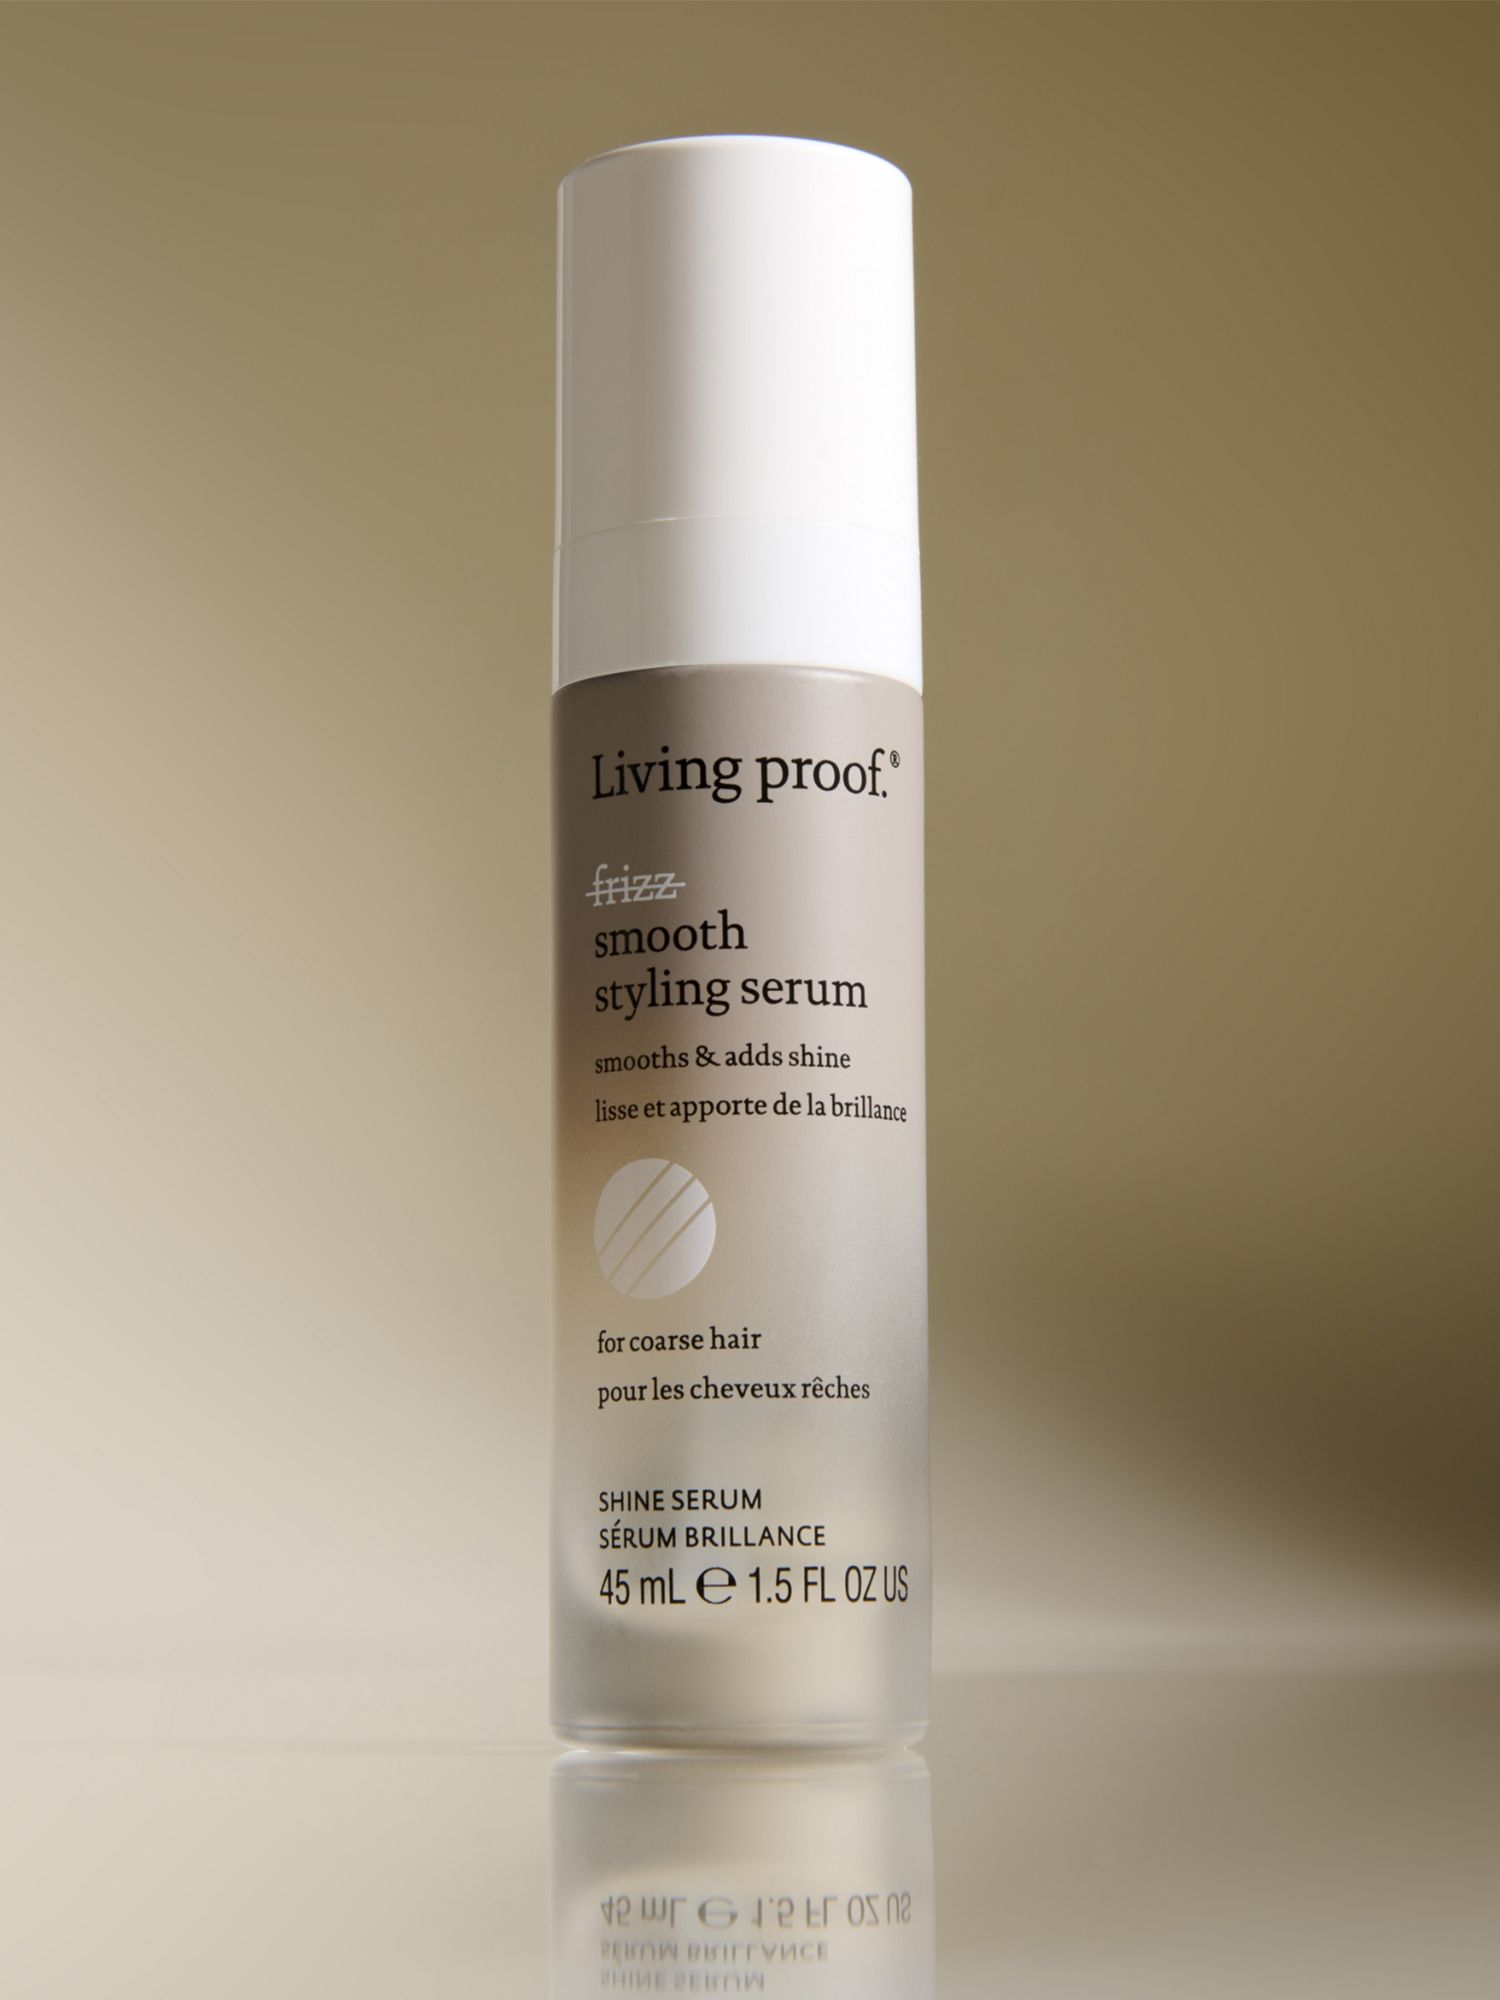 Living Proof No Frizz Smooth Styling Serum, 45ml 4